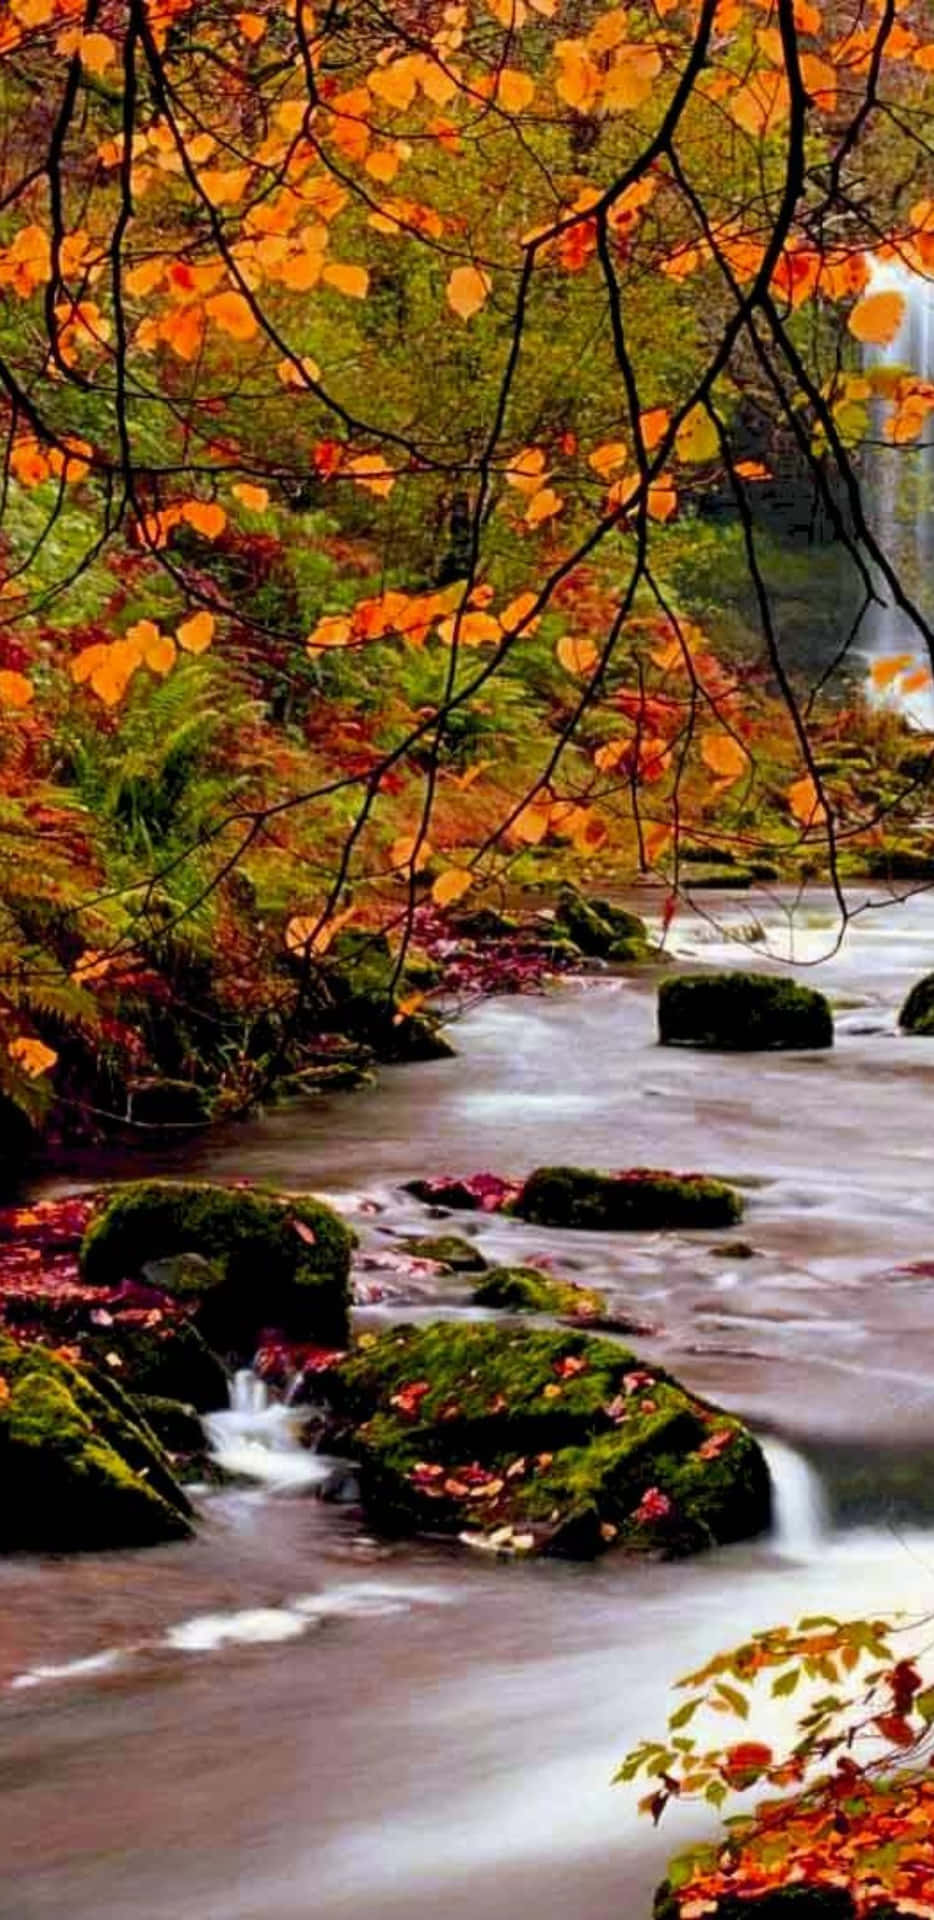 Pixel 3xl Autumn Background River In The Forest Wallpaper